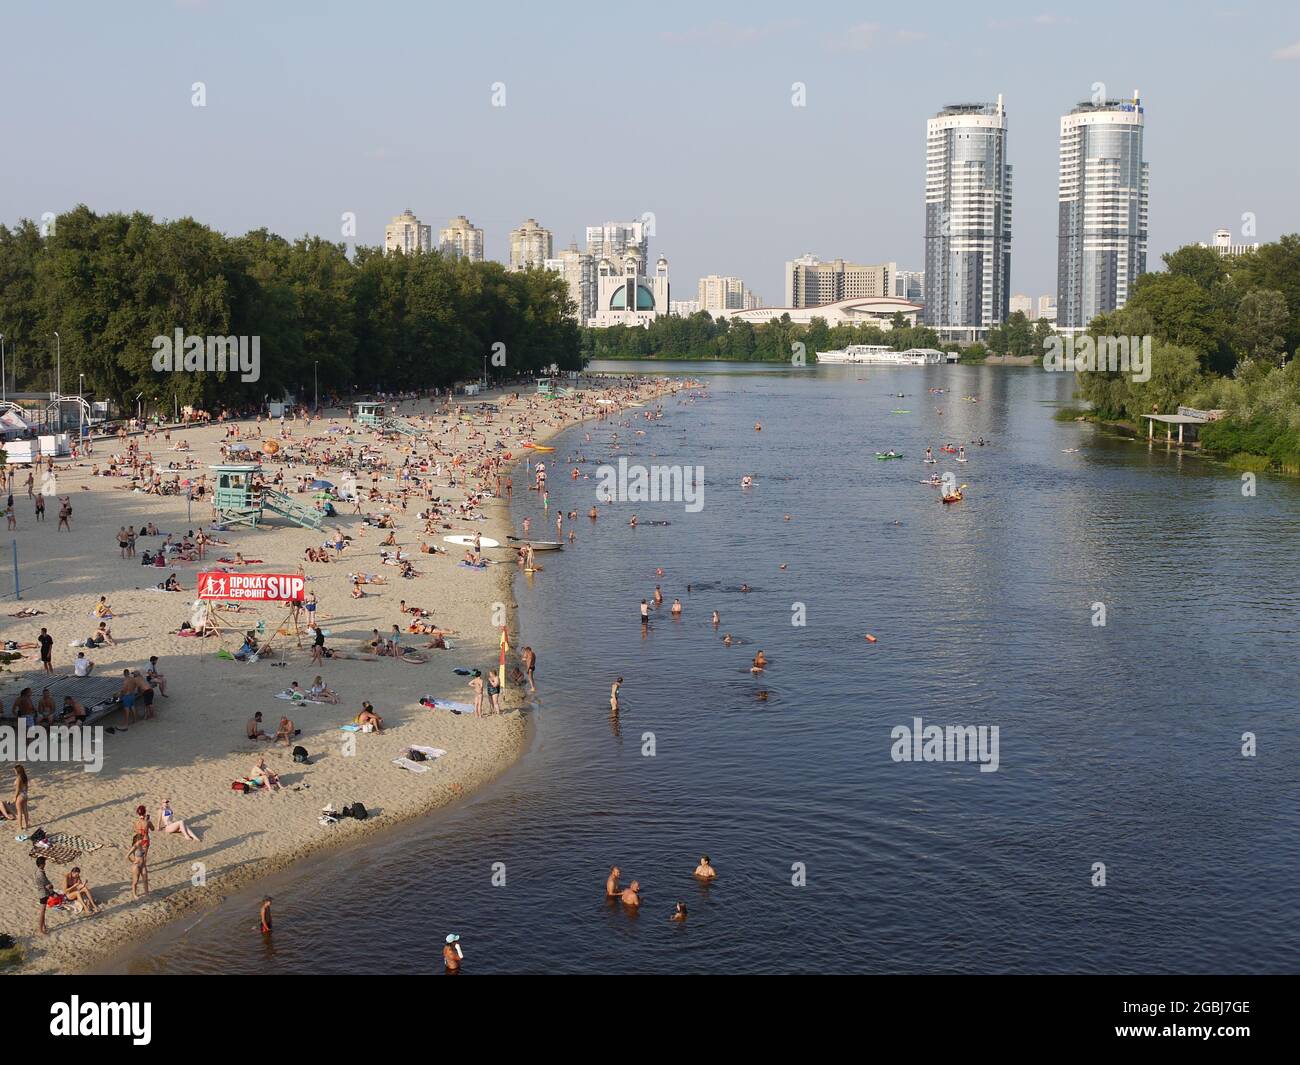 The beaches on the banks of the Dnieper river in central Kiev, Ukraine, in midsummer Stock Photo